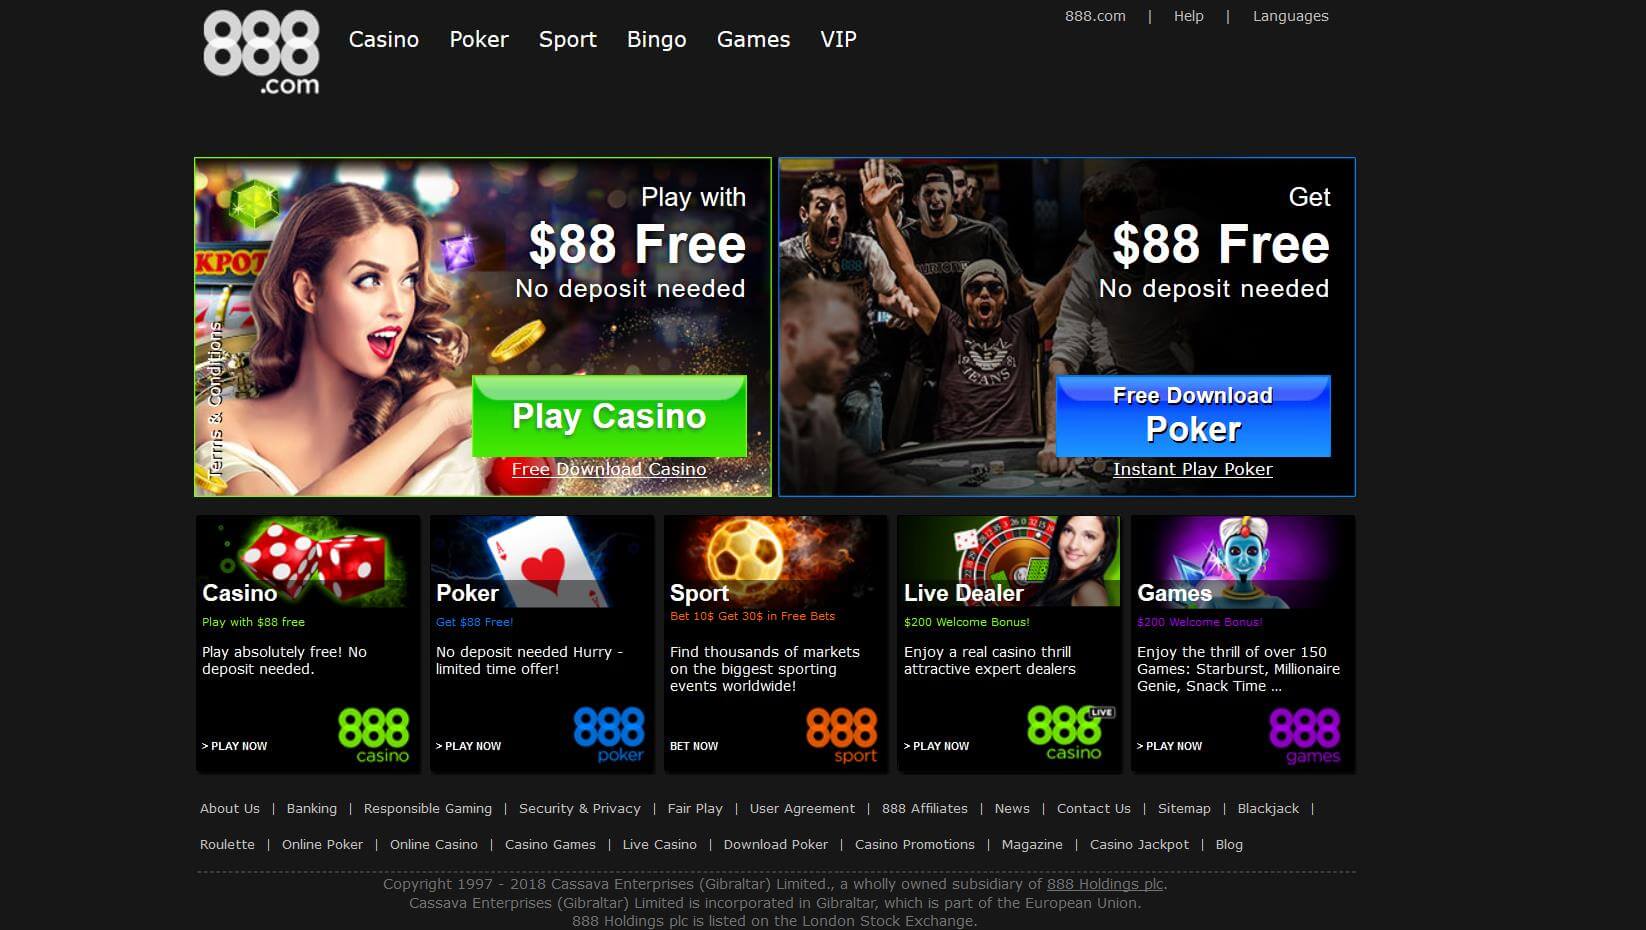 Casino games are released the casino can award a little no deposit for the brand pokerdom club ru официальный сайт покердом